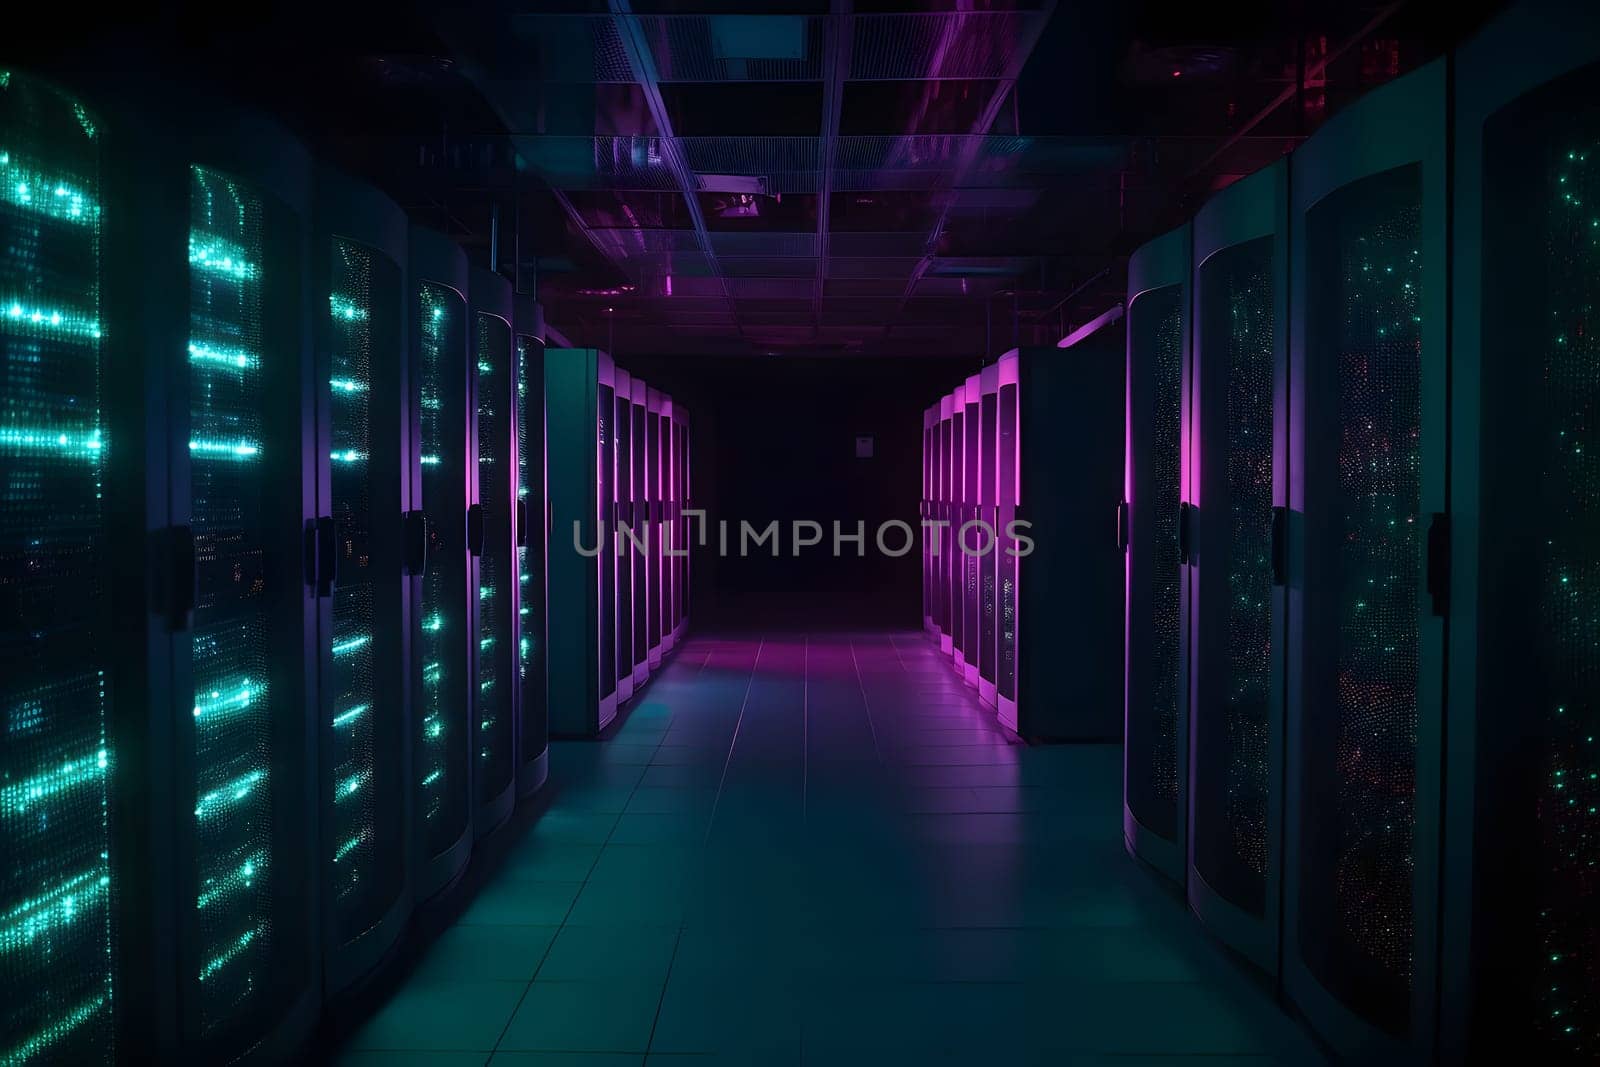 data center with multiple rows of fully operational servers in cyan-purple colors, neural network generated image by z1b